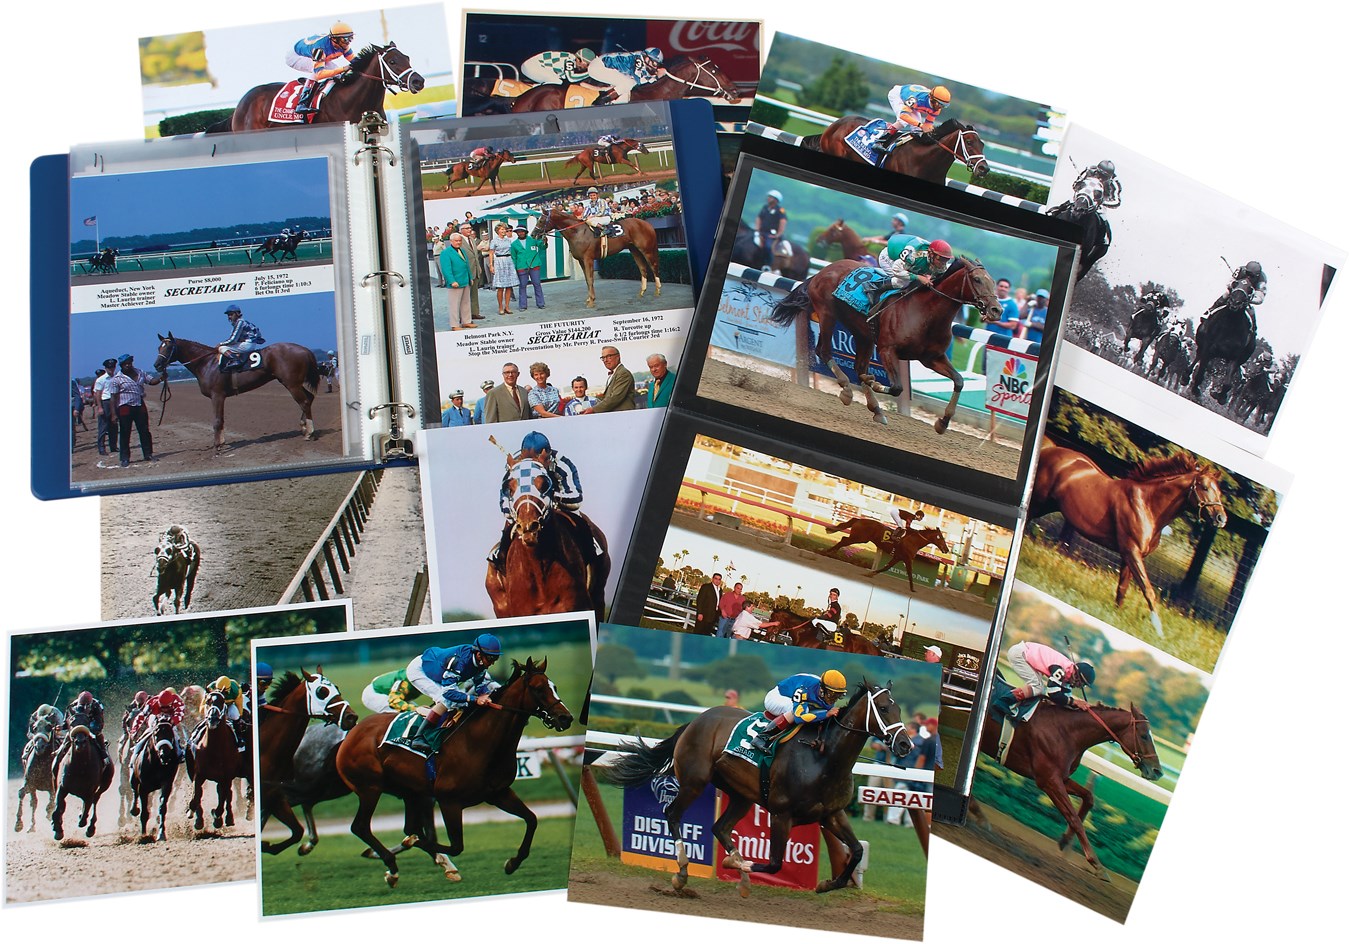 Horse Racing - Horse Racing Photograph Collection with Iconic Images (225+)